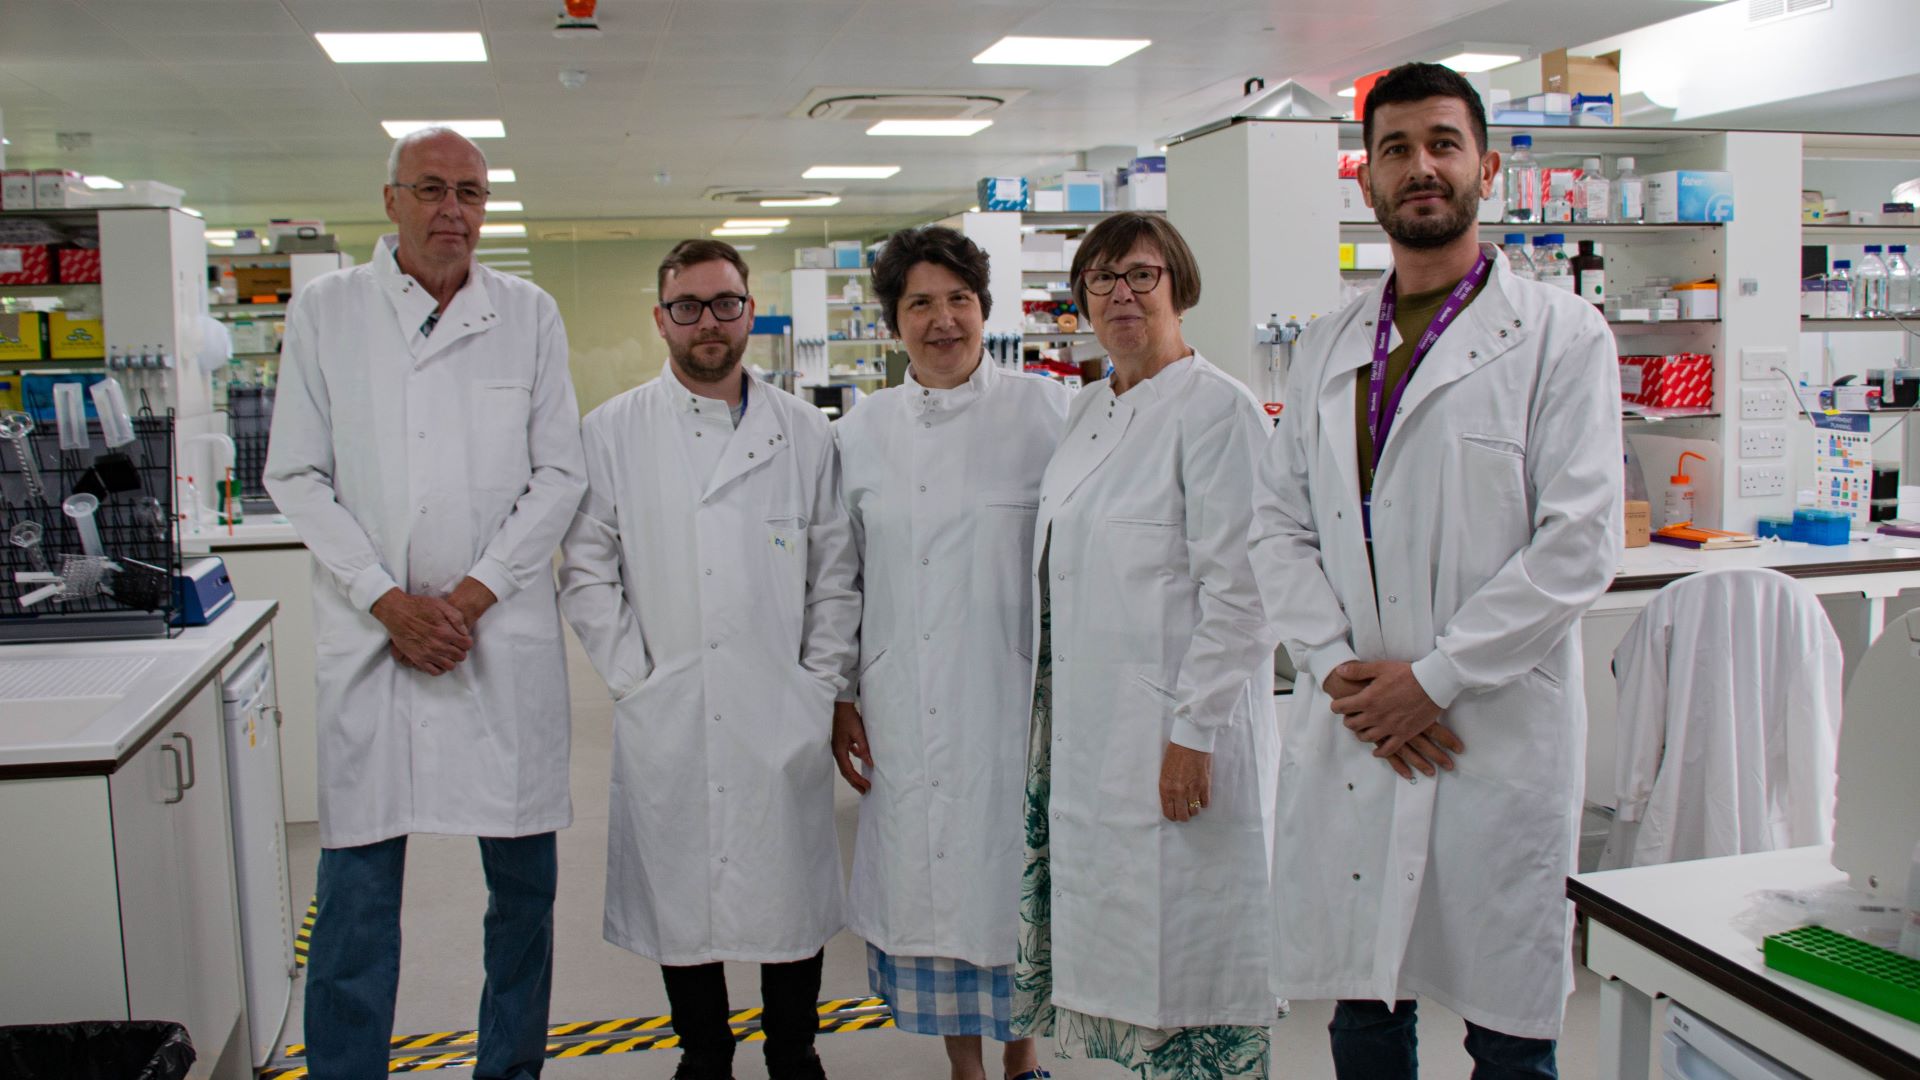 Macular degeneration research team stand together for a photo.